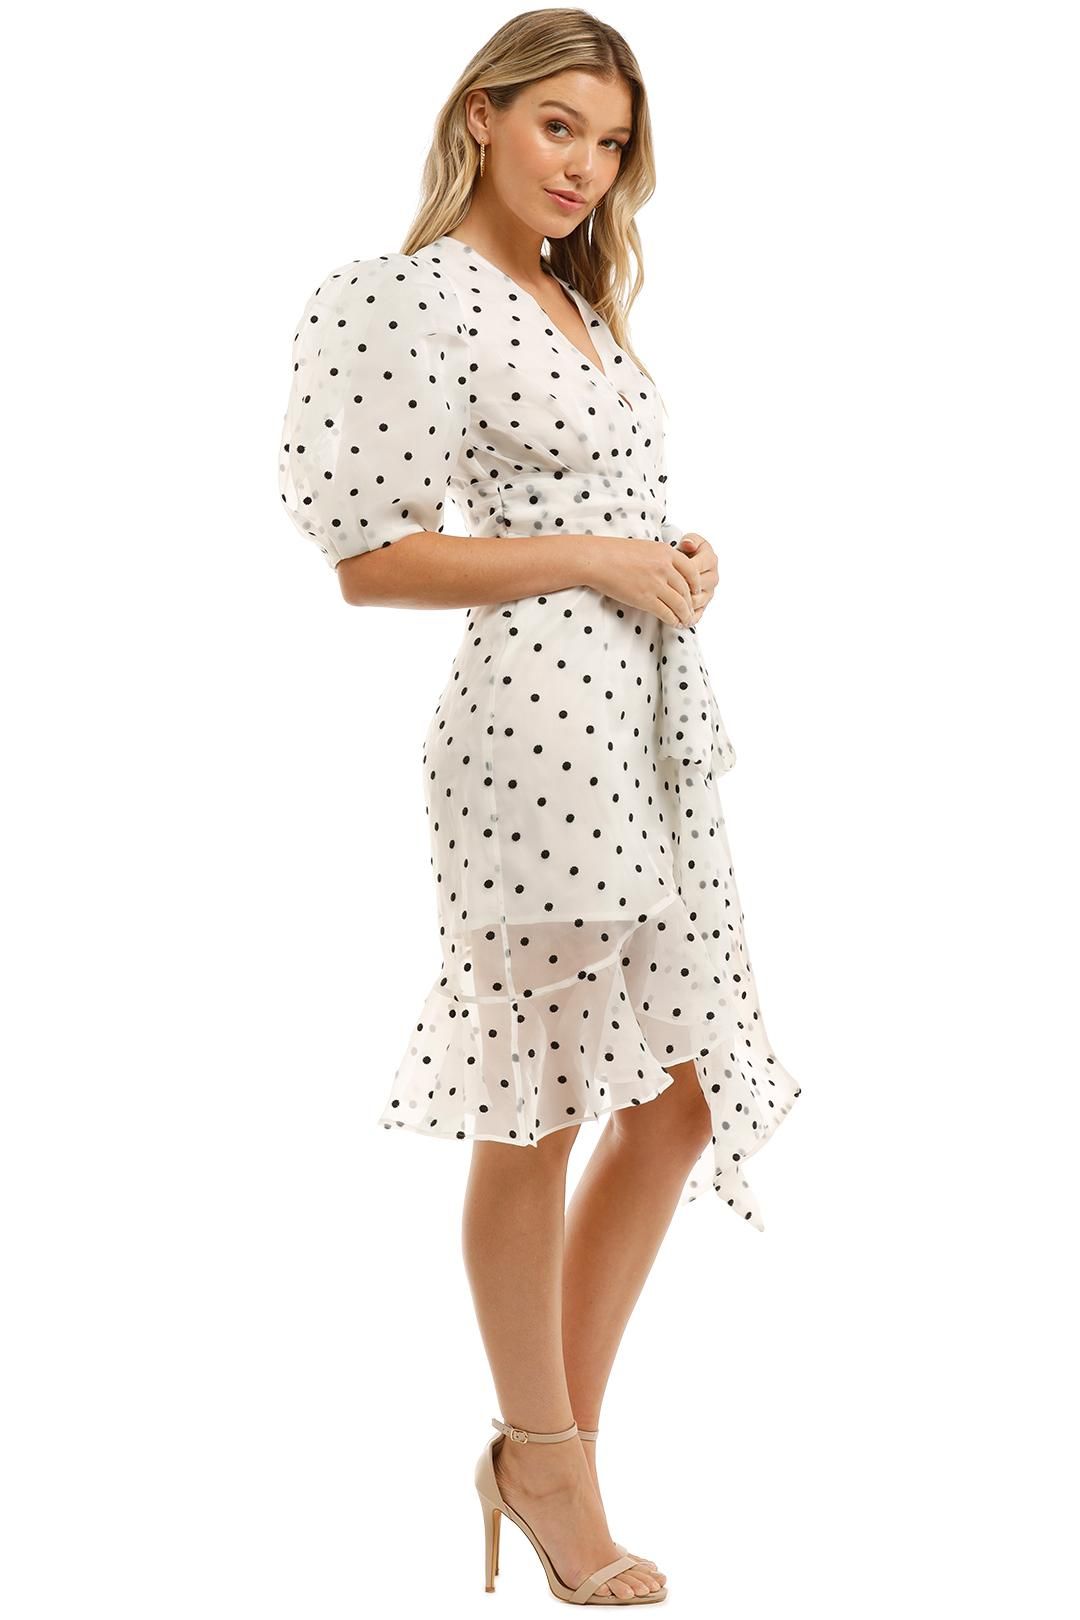 Thurley Glider Dress Black and White Polkadot Embroidery